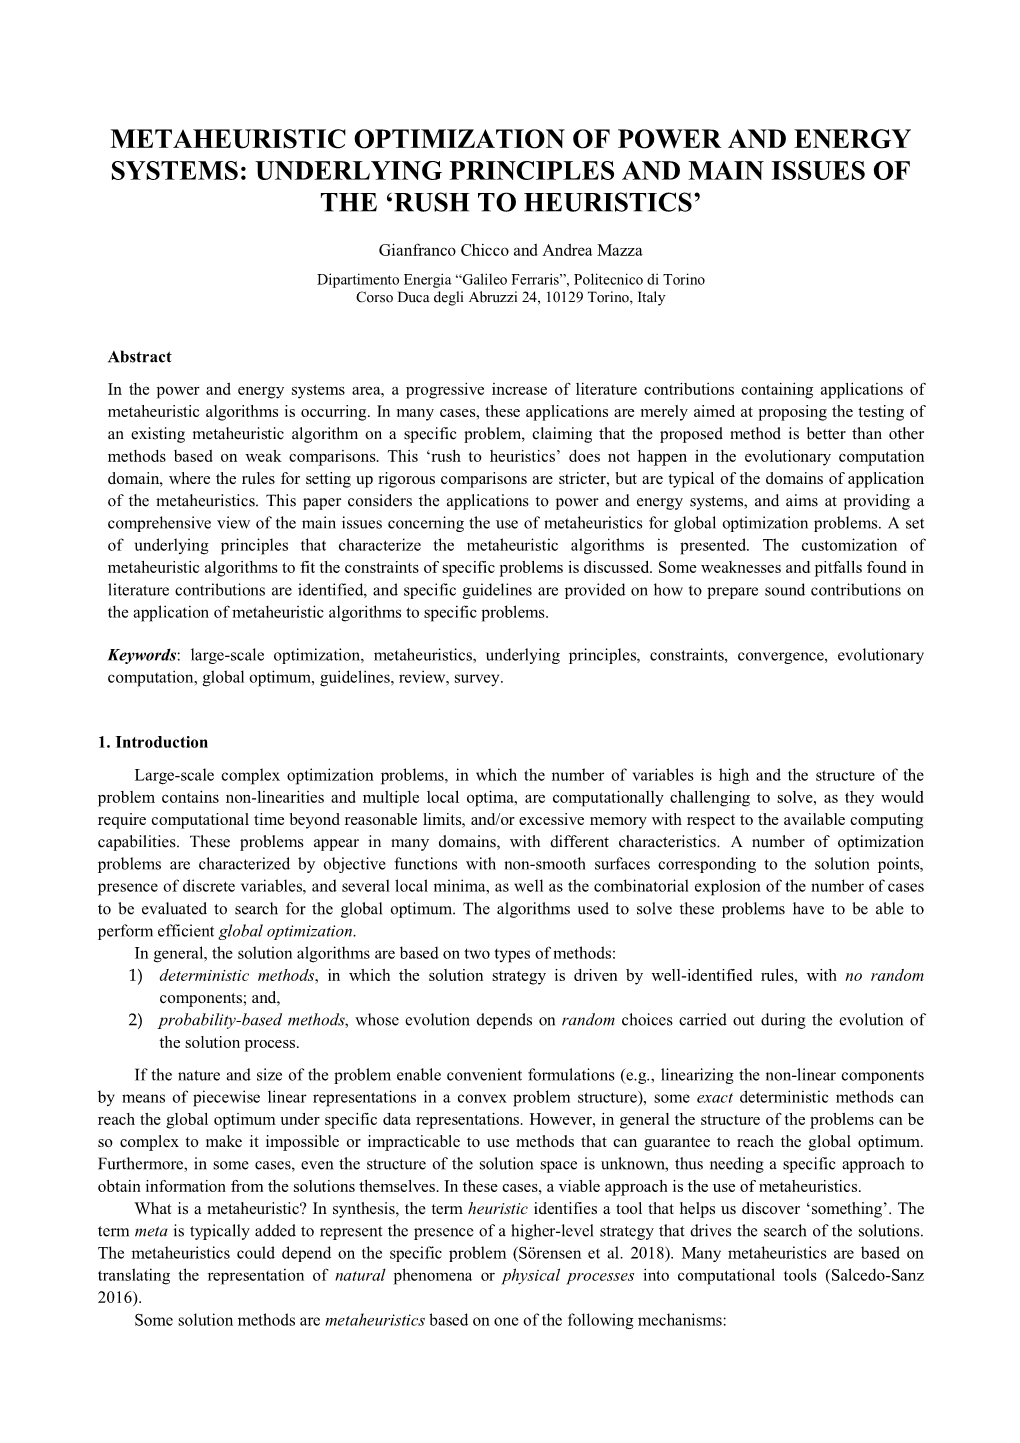 Metaheuristic Optimization of Power and Energy Systems: Underlying Principles and Main Issues of the 'Rush to Heuristics'